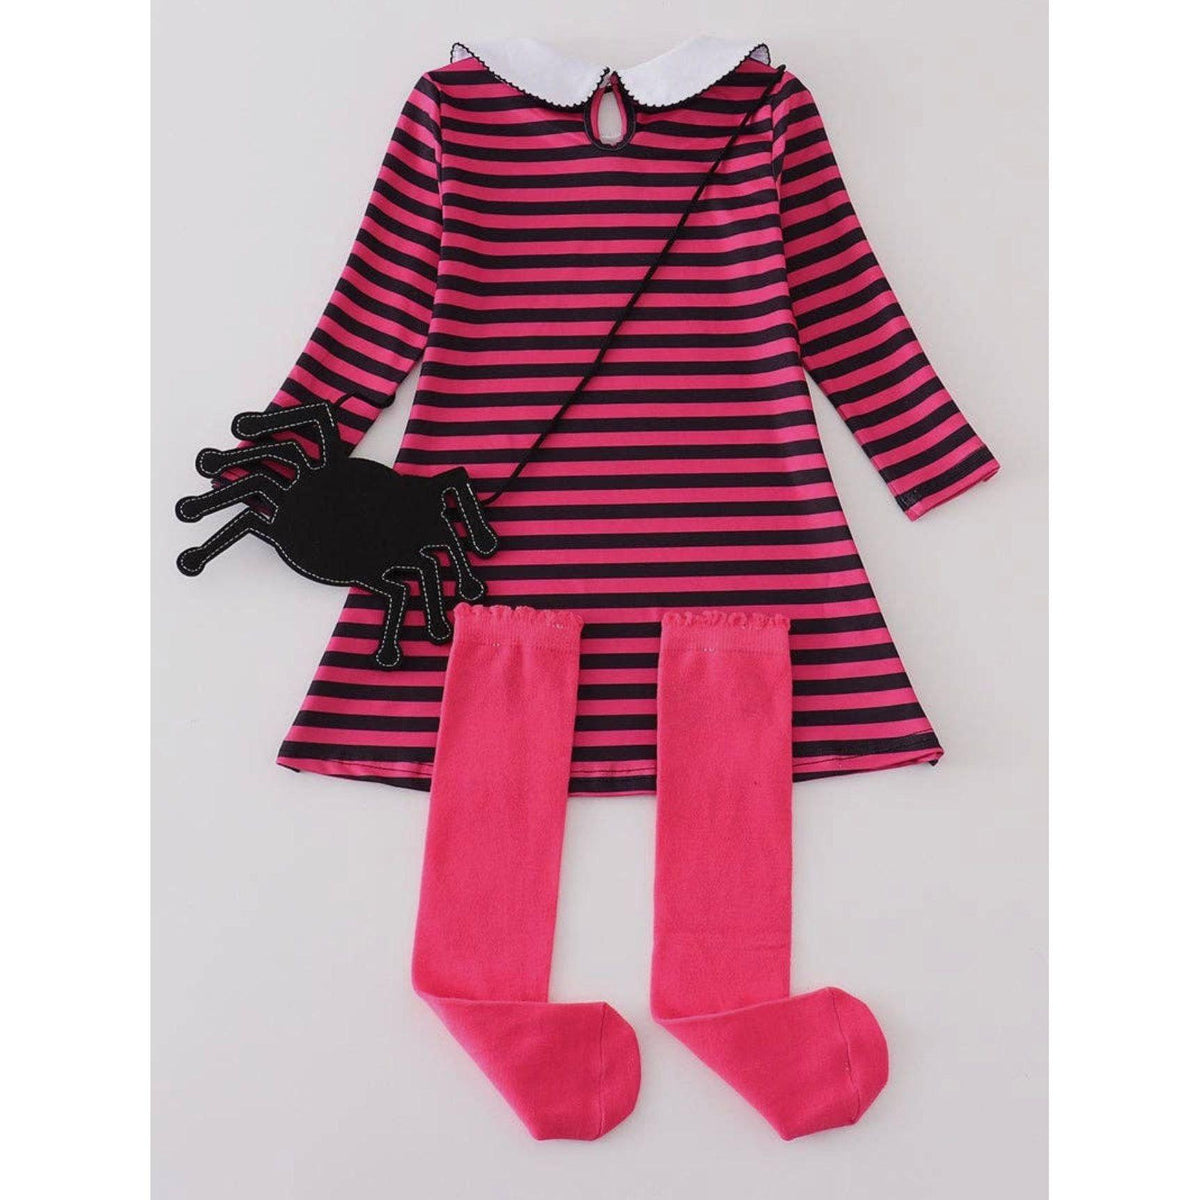 Girl's Striped Spider Dress with Matching Pouch and Socks in Pink | Halloween Dress - becauseofadi